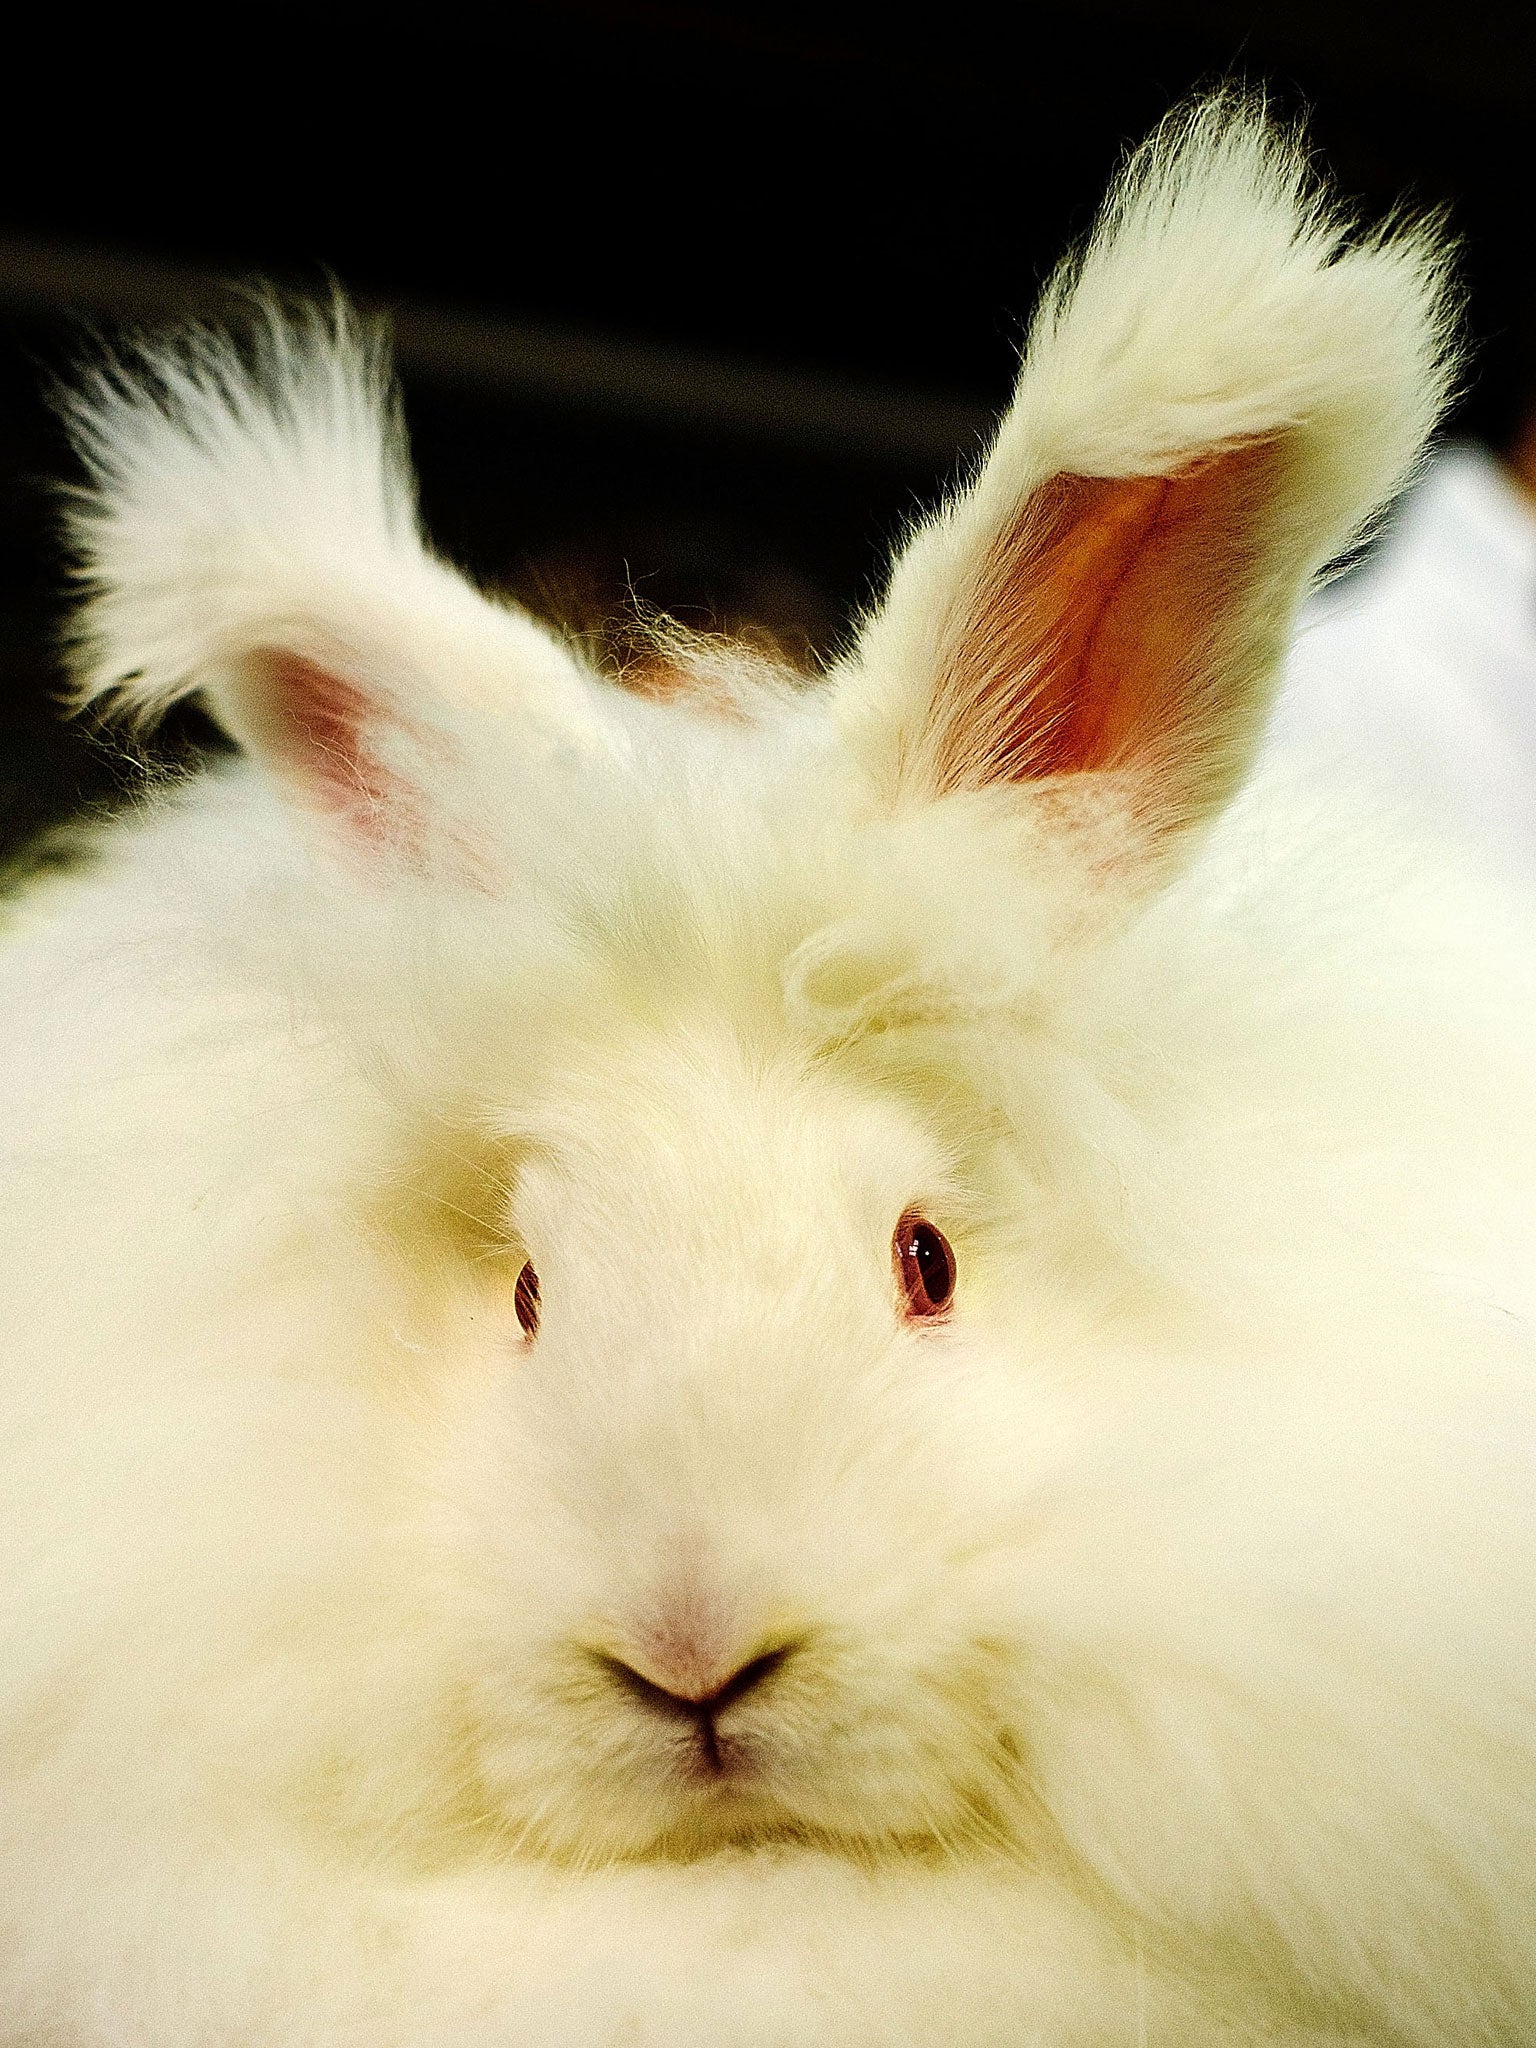 More shops ban the sale of angora wool after video exposes cruelty